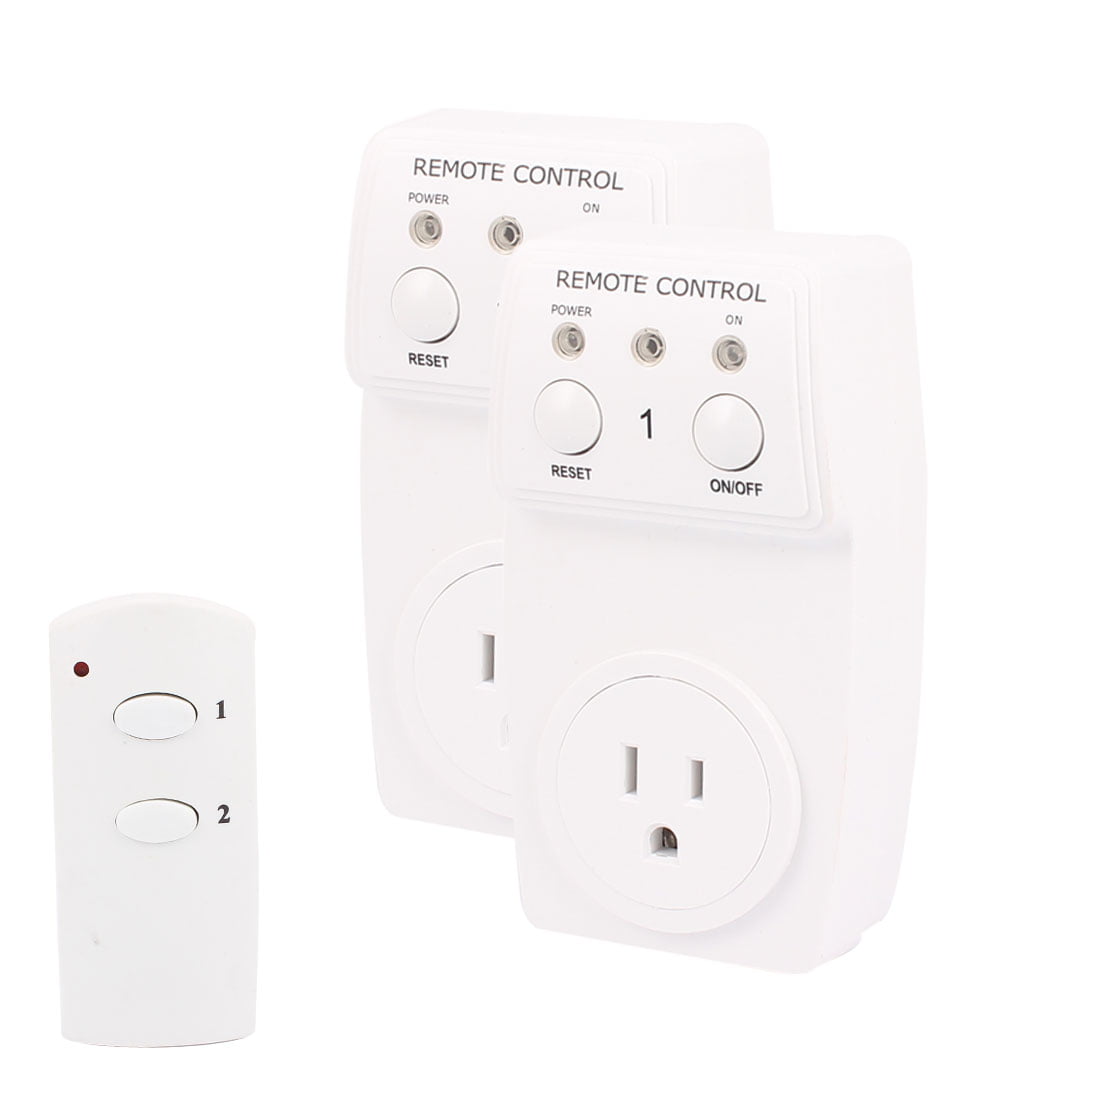 Wirelessly Turn Power On Off Wireless Electrical Outlet Plug for Household Appliances Lamp Light Wireless Outlet Switch with Remote Control 3 Pack with 1 Learning Code Remote Control